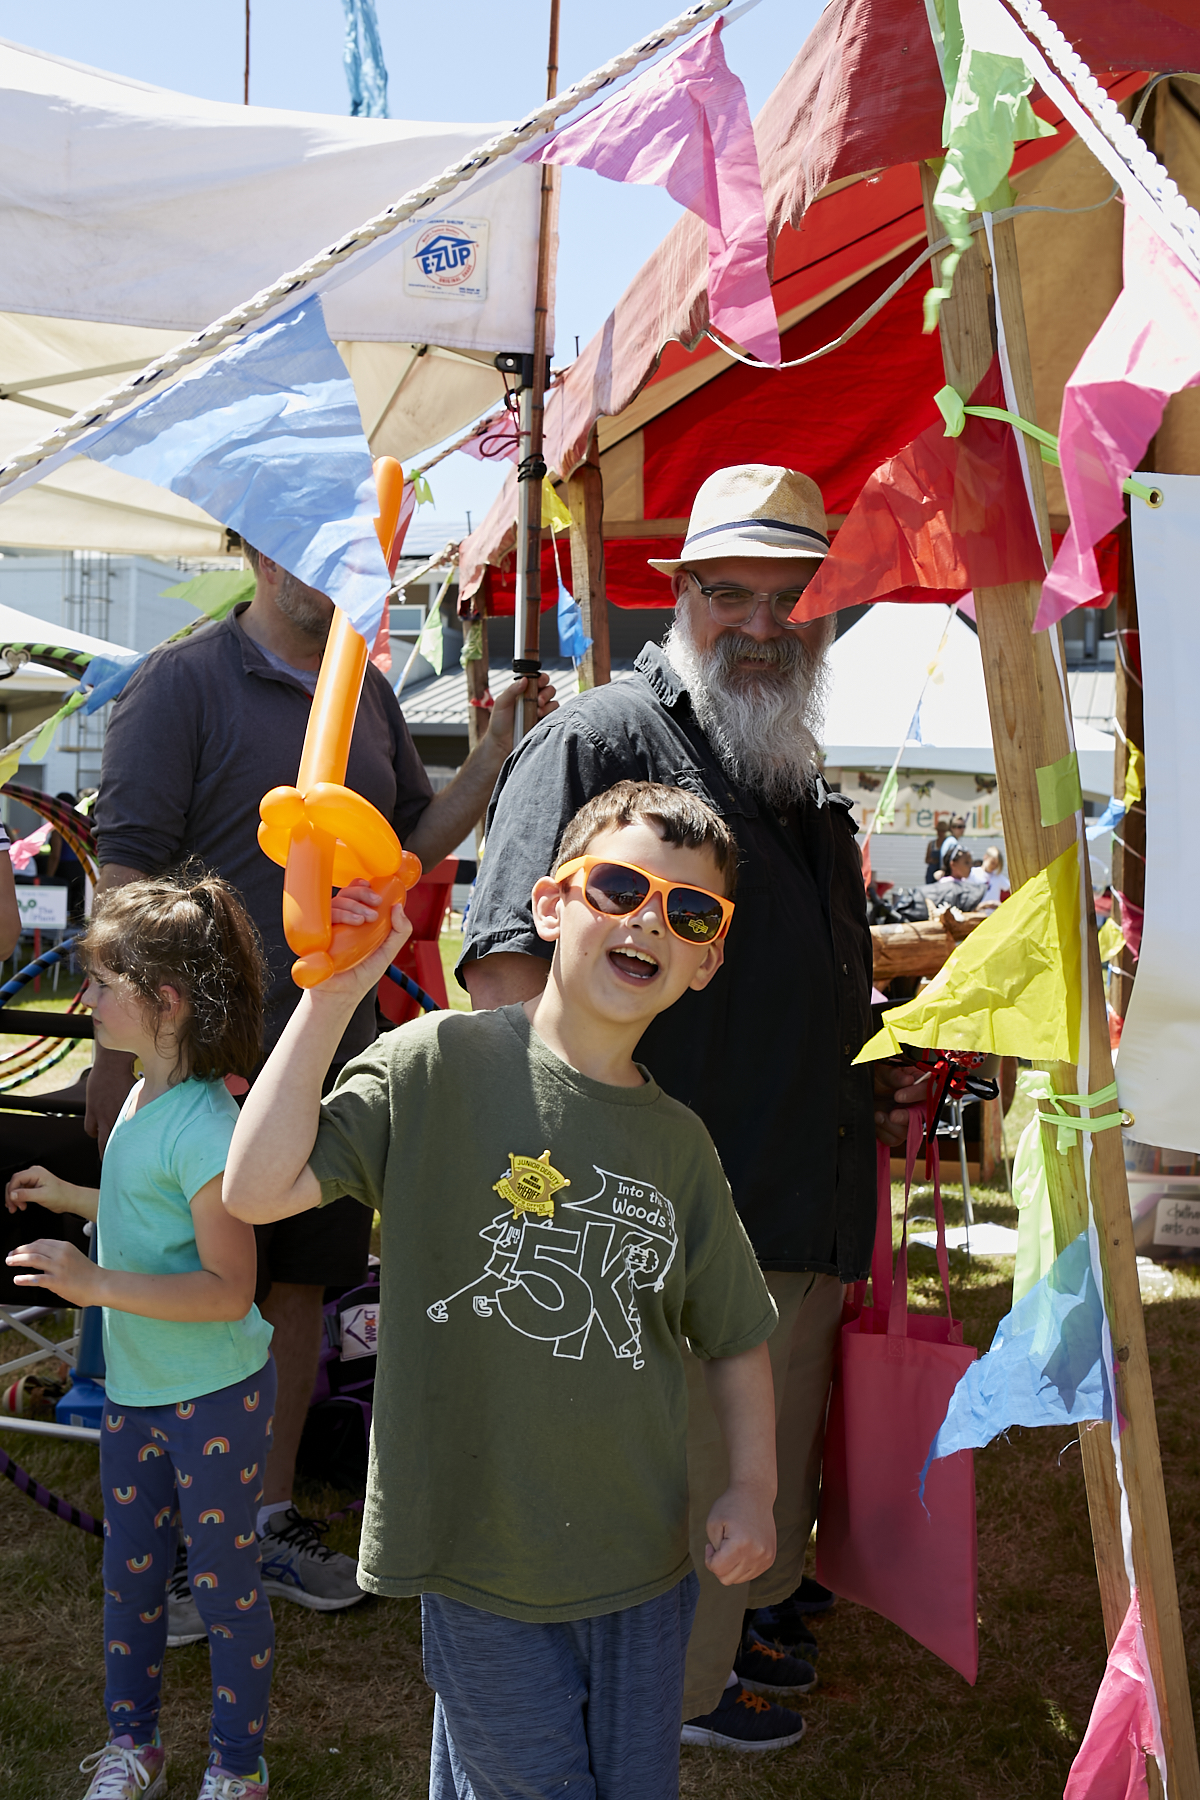 Photo of boy wearing sunglasses holding balloon sword in the air while bearded man (dad) smiles